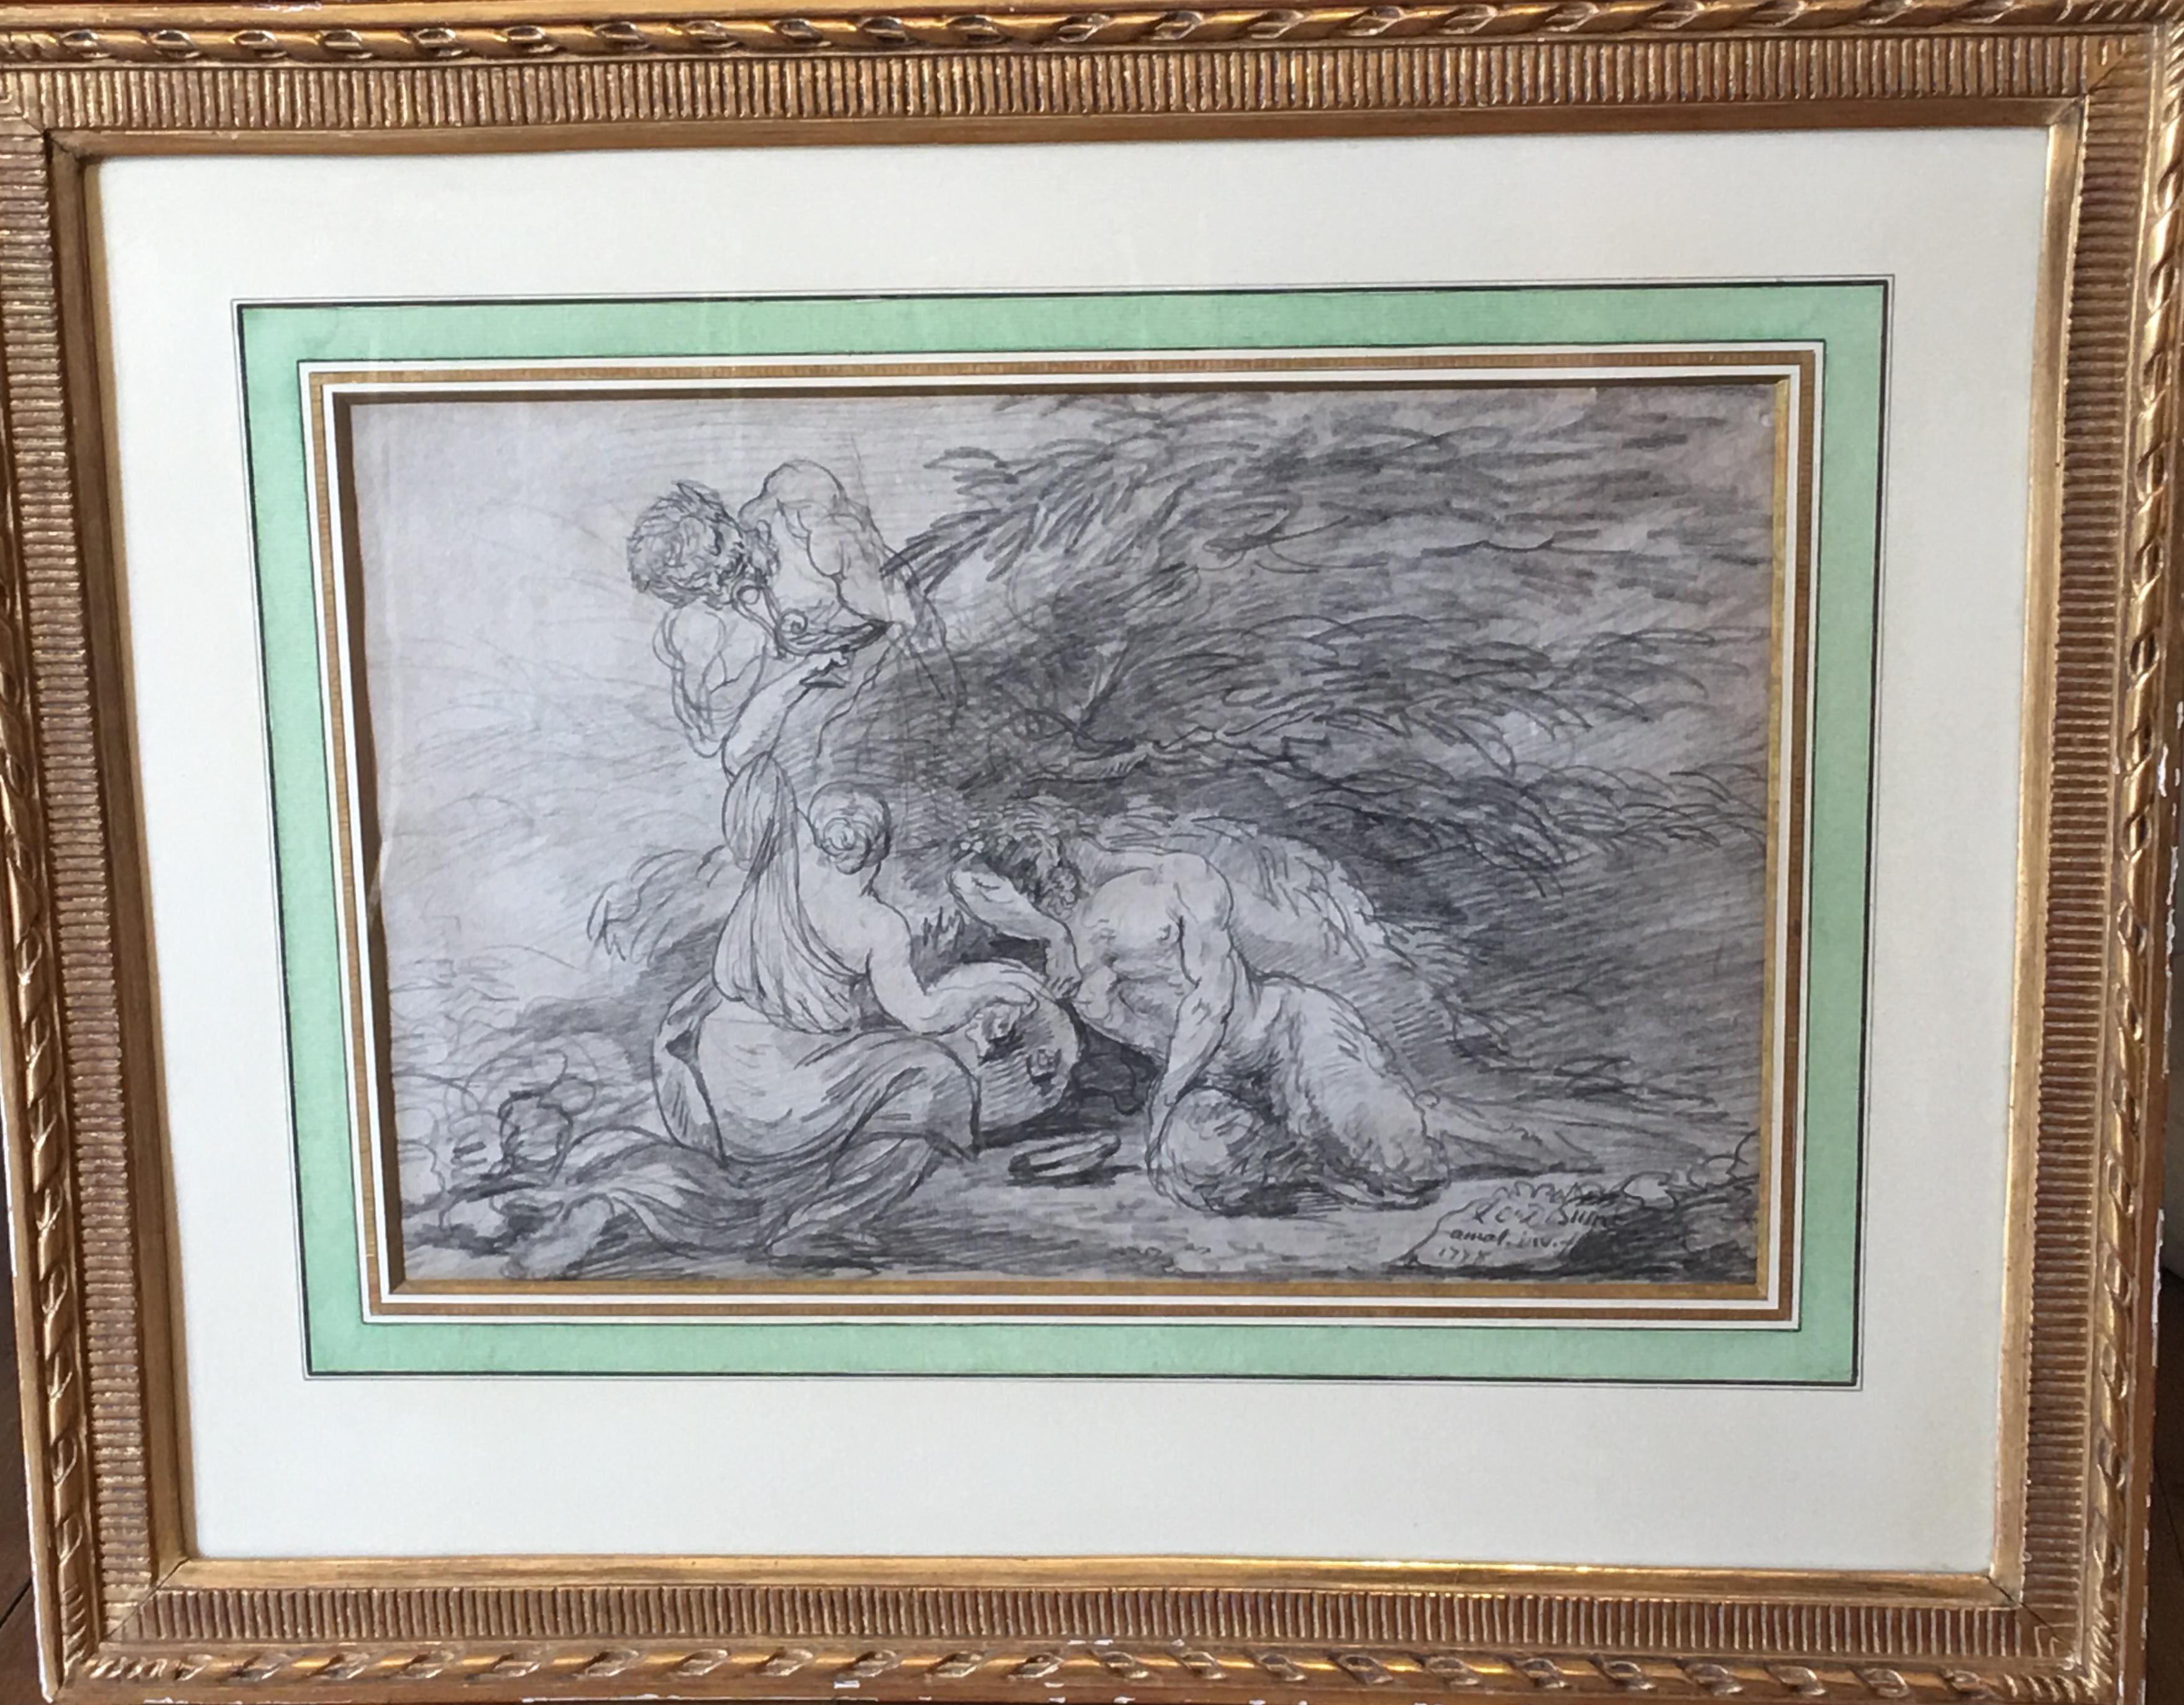 Bacchanal scene with nymp and Satyrs, pencil on Paper signed and dated 1778 - Academic Art by Unknown